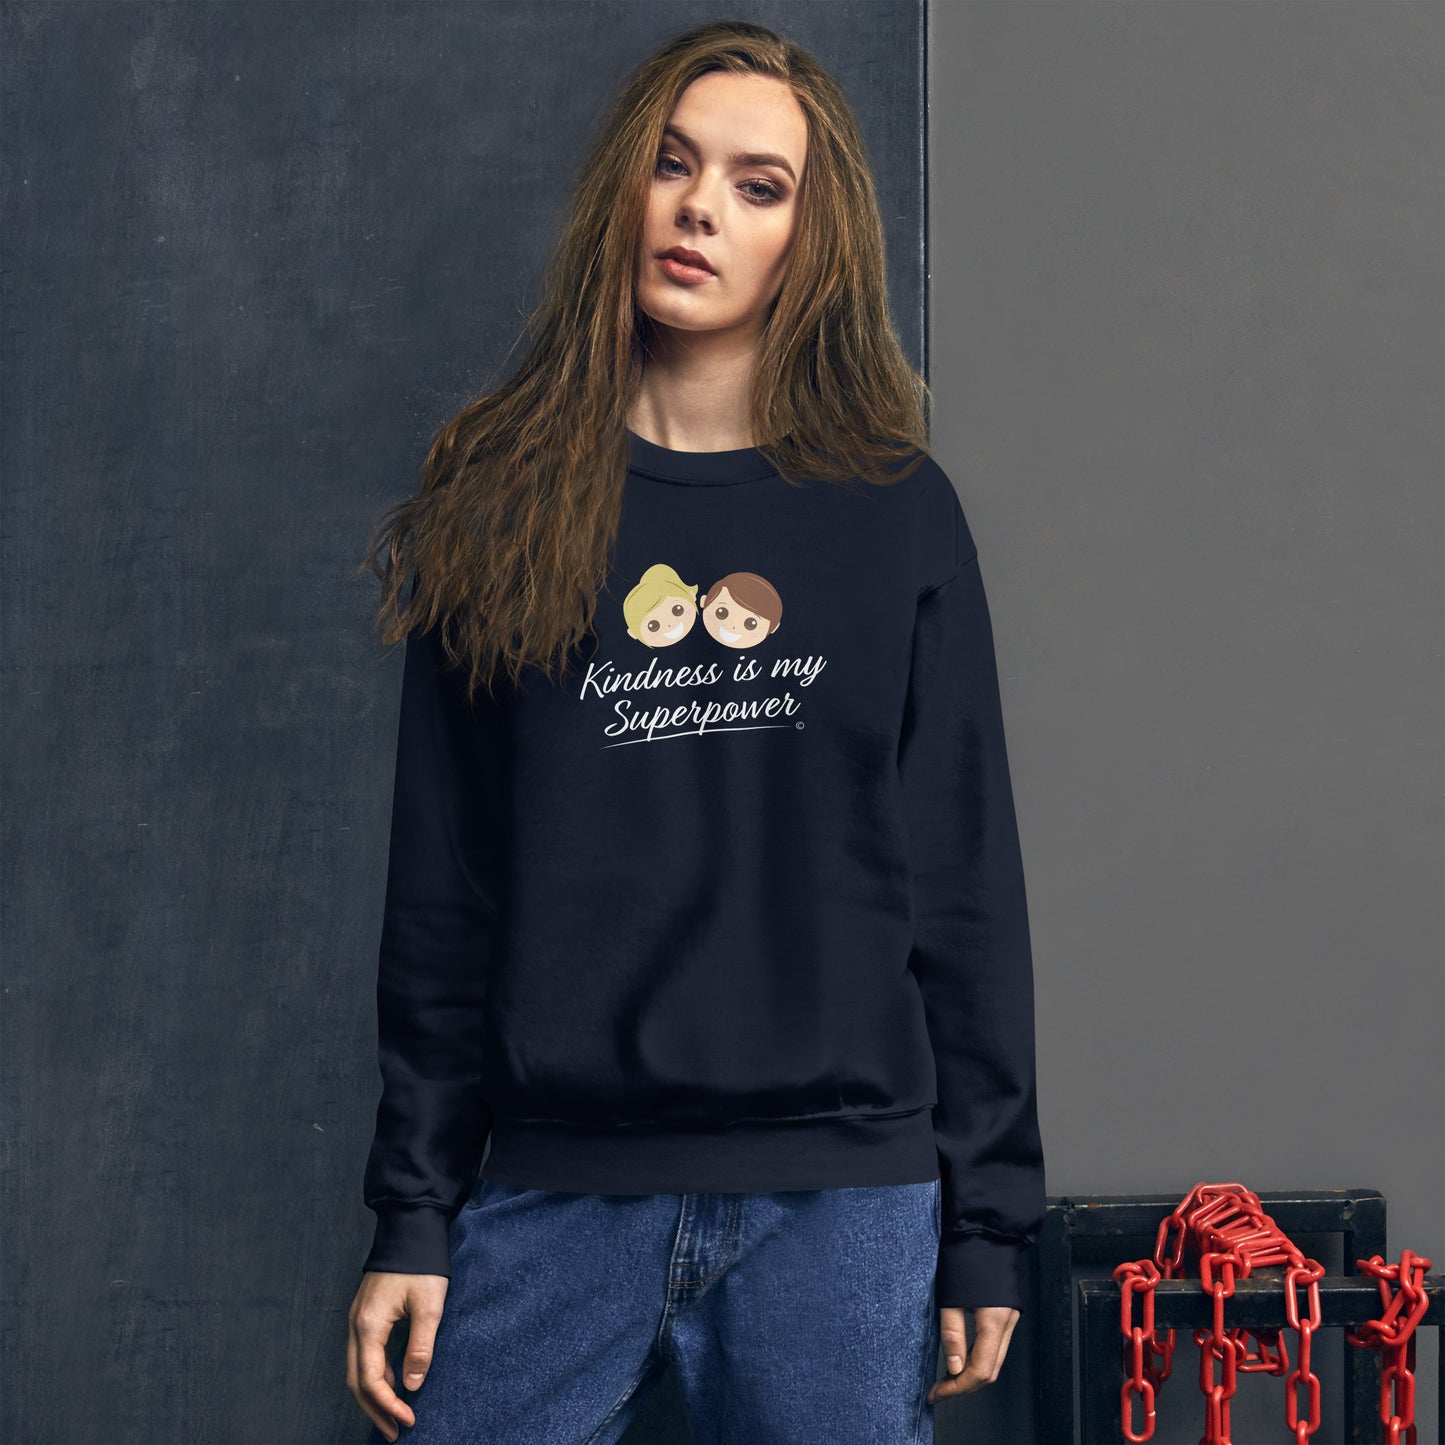 A stylish  woman confidently modeling a cozy unisex sweatshirt in navy, both adorned with the empowering quote 'Kindness is my Superpower' in bold lettering.